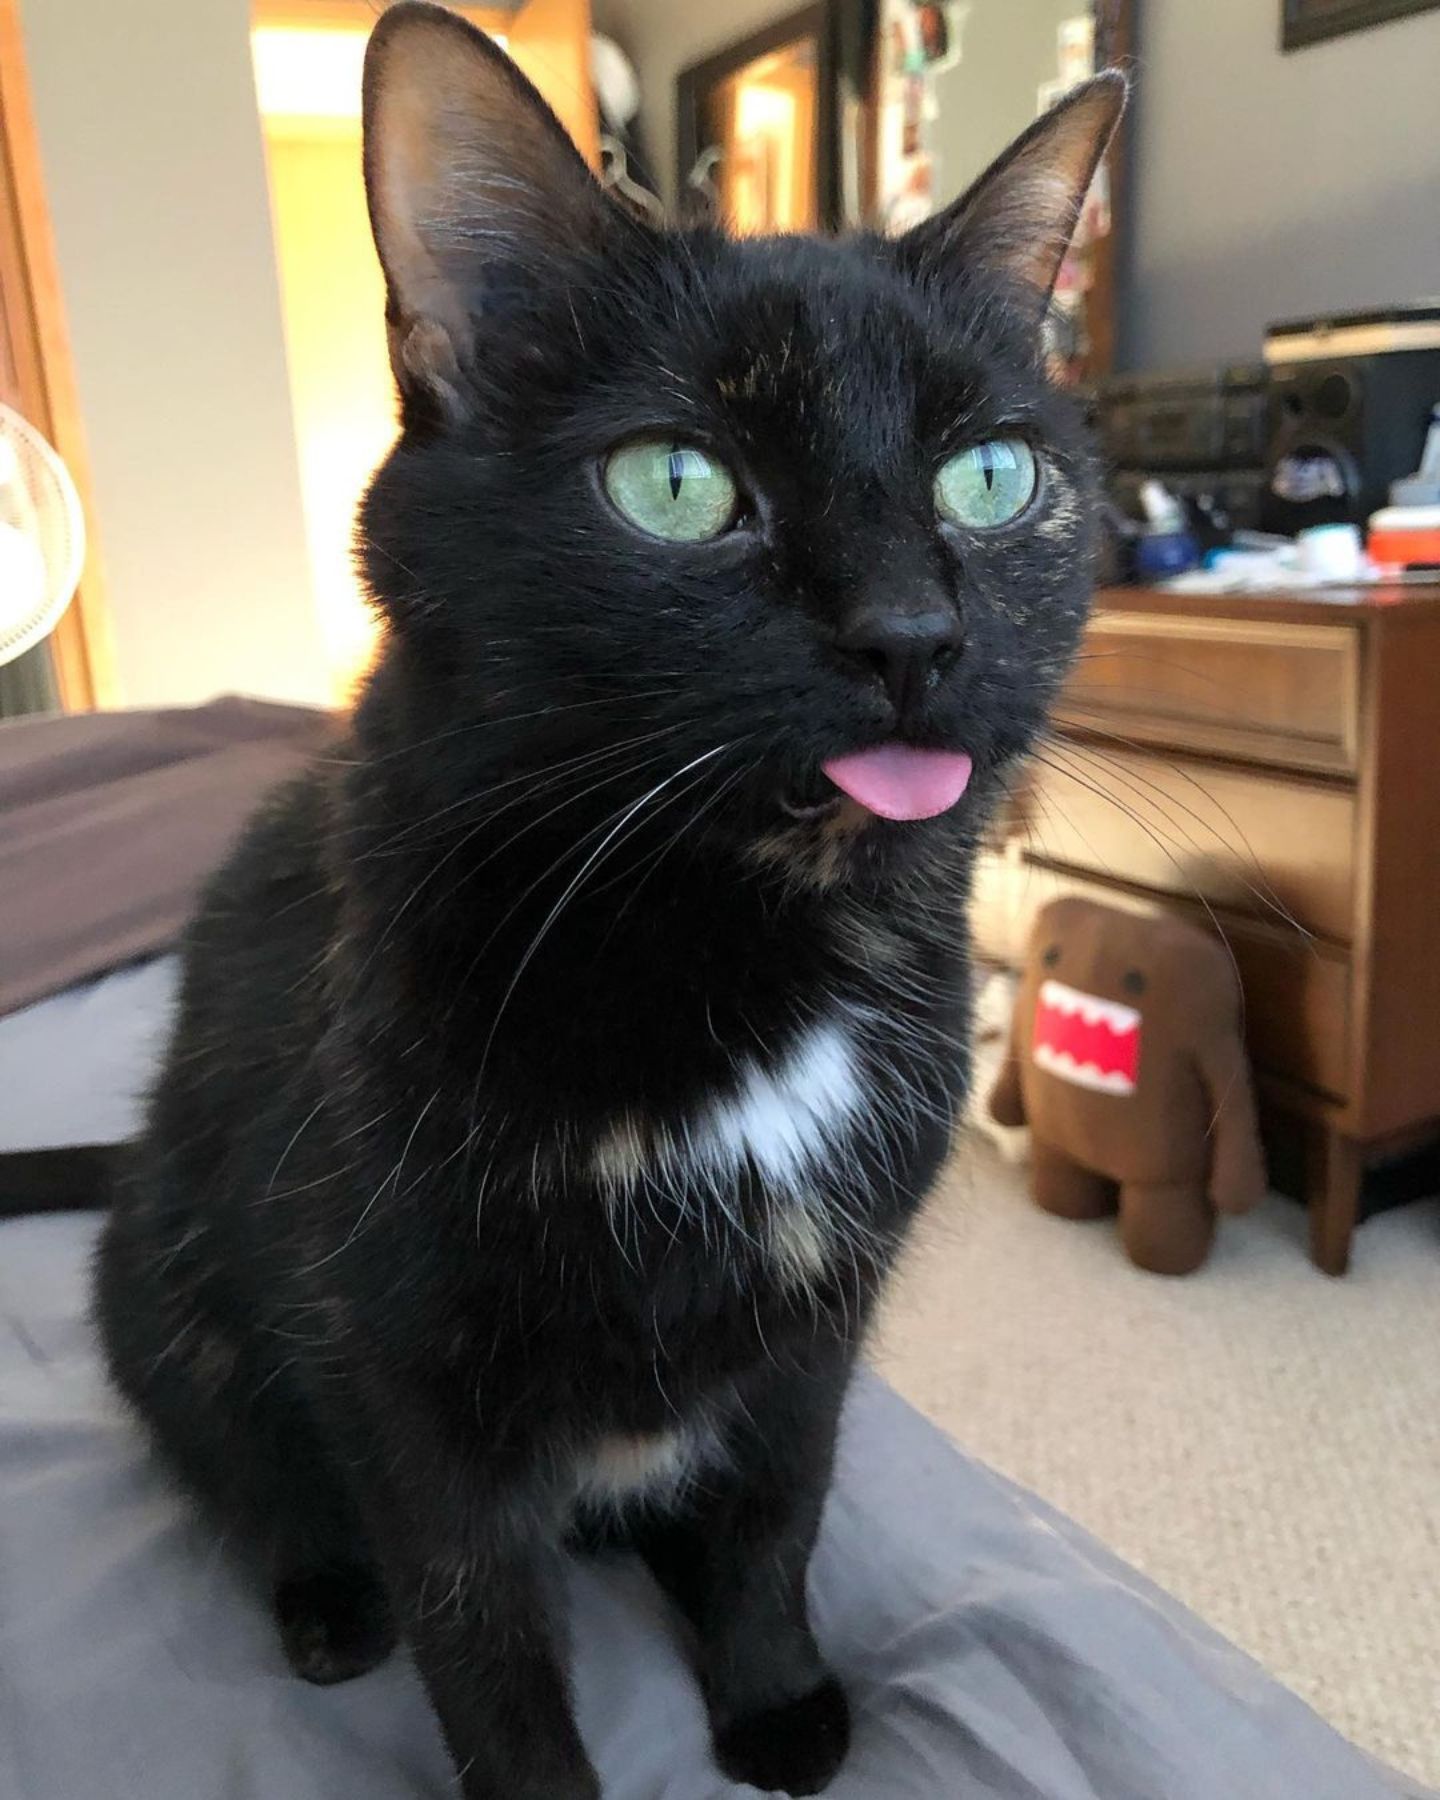 cat sticking its tongue out